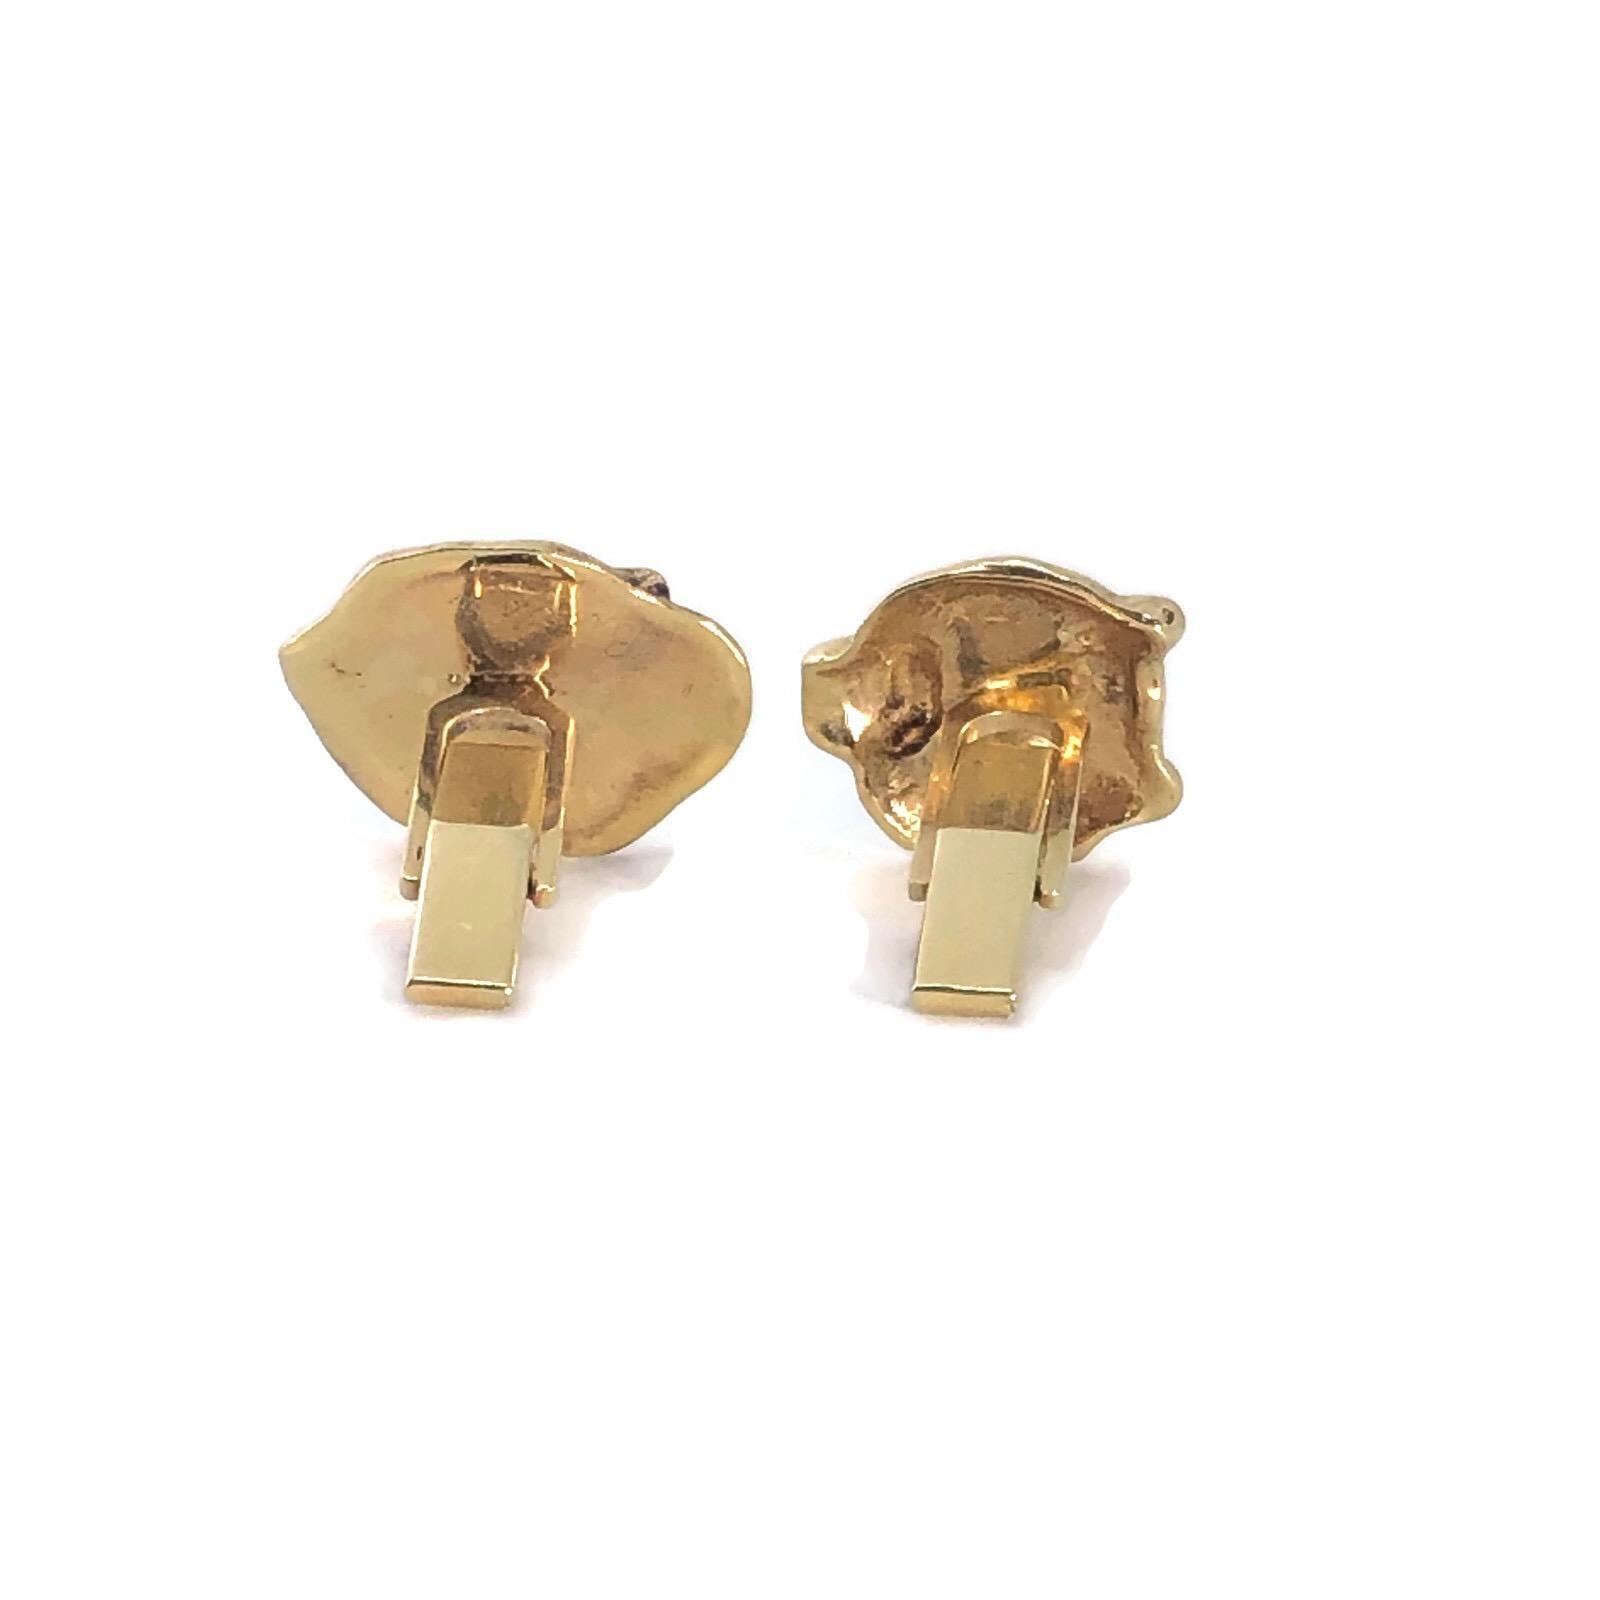 Unique collectible Vintage 14k yellow gold men's or ladies' cufflinks in mint condition. Although they are vintage, probably from the 50's or 60's, they have a modern look which makes them more attractive than the models that are naturalistic.

Add